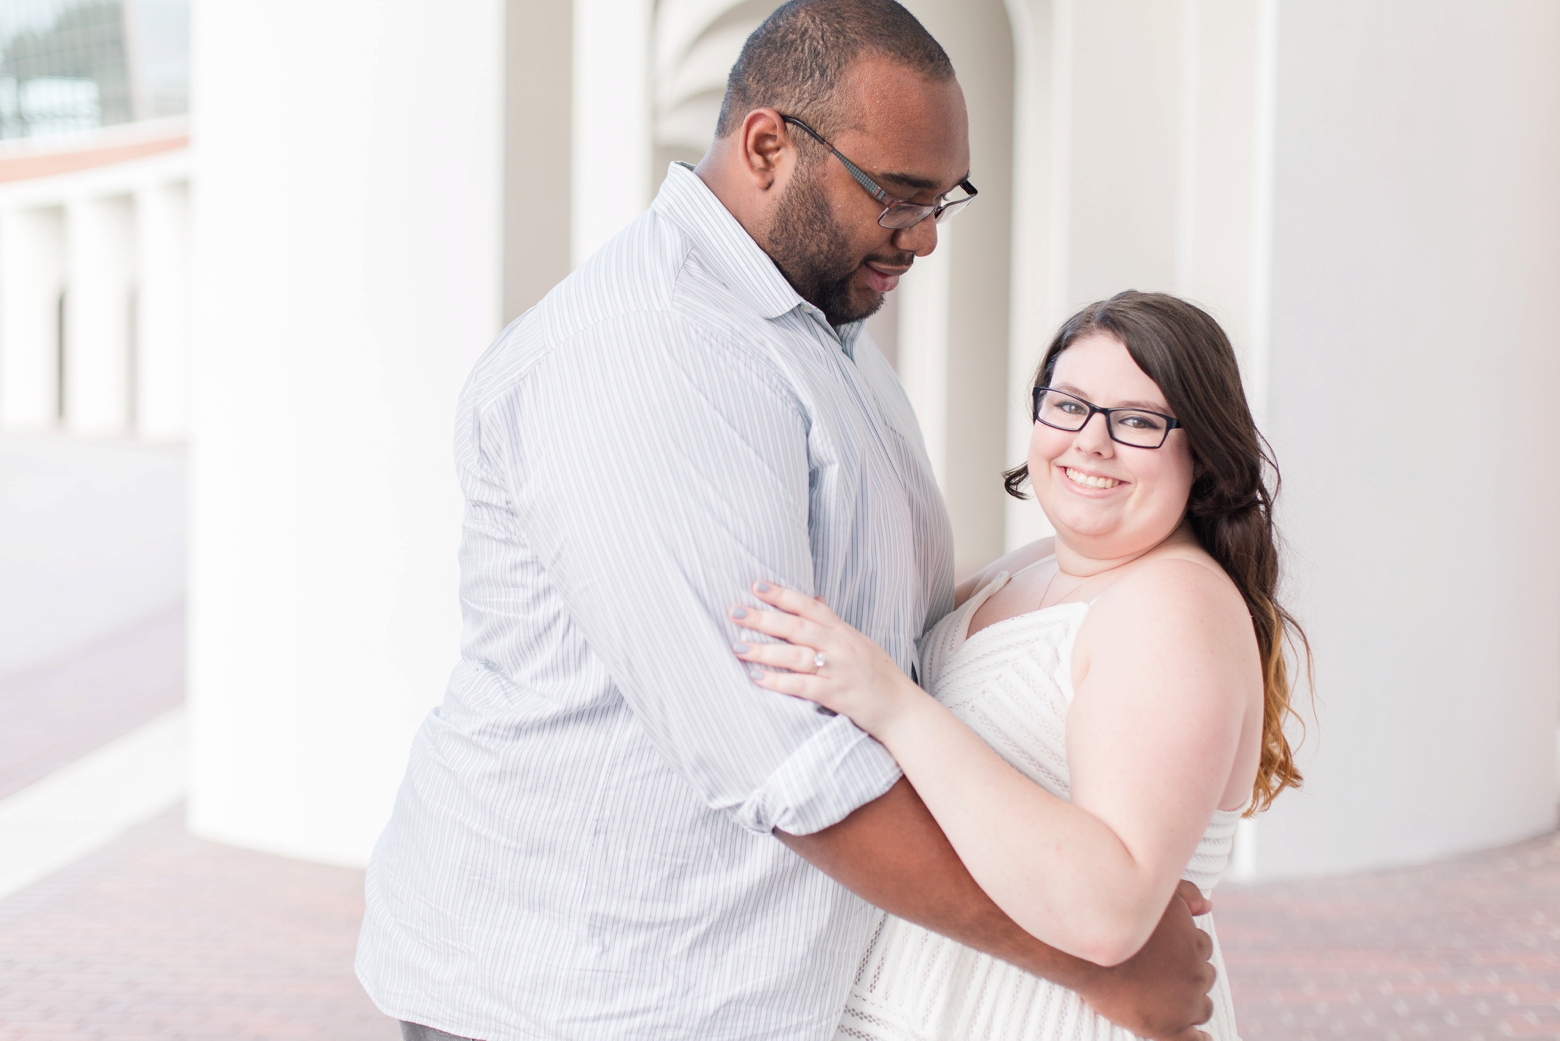 CNU Engagement Photography by Angie McPherson Photography